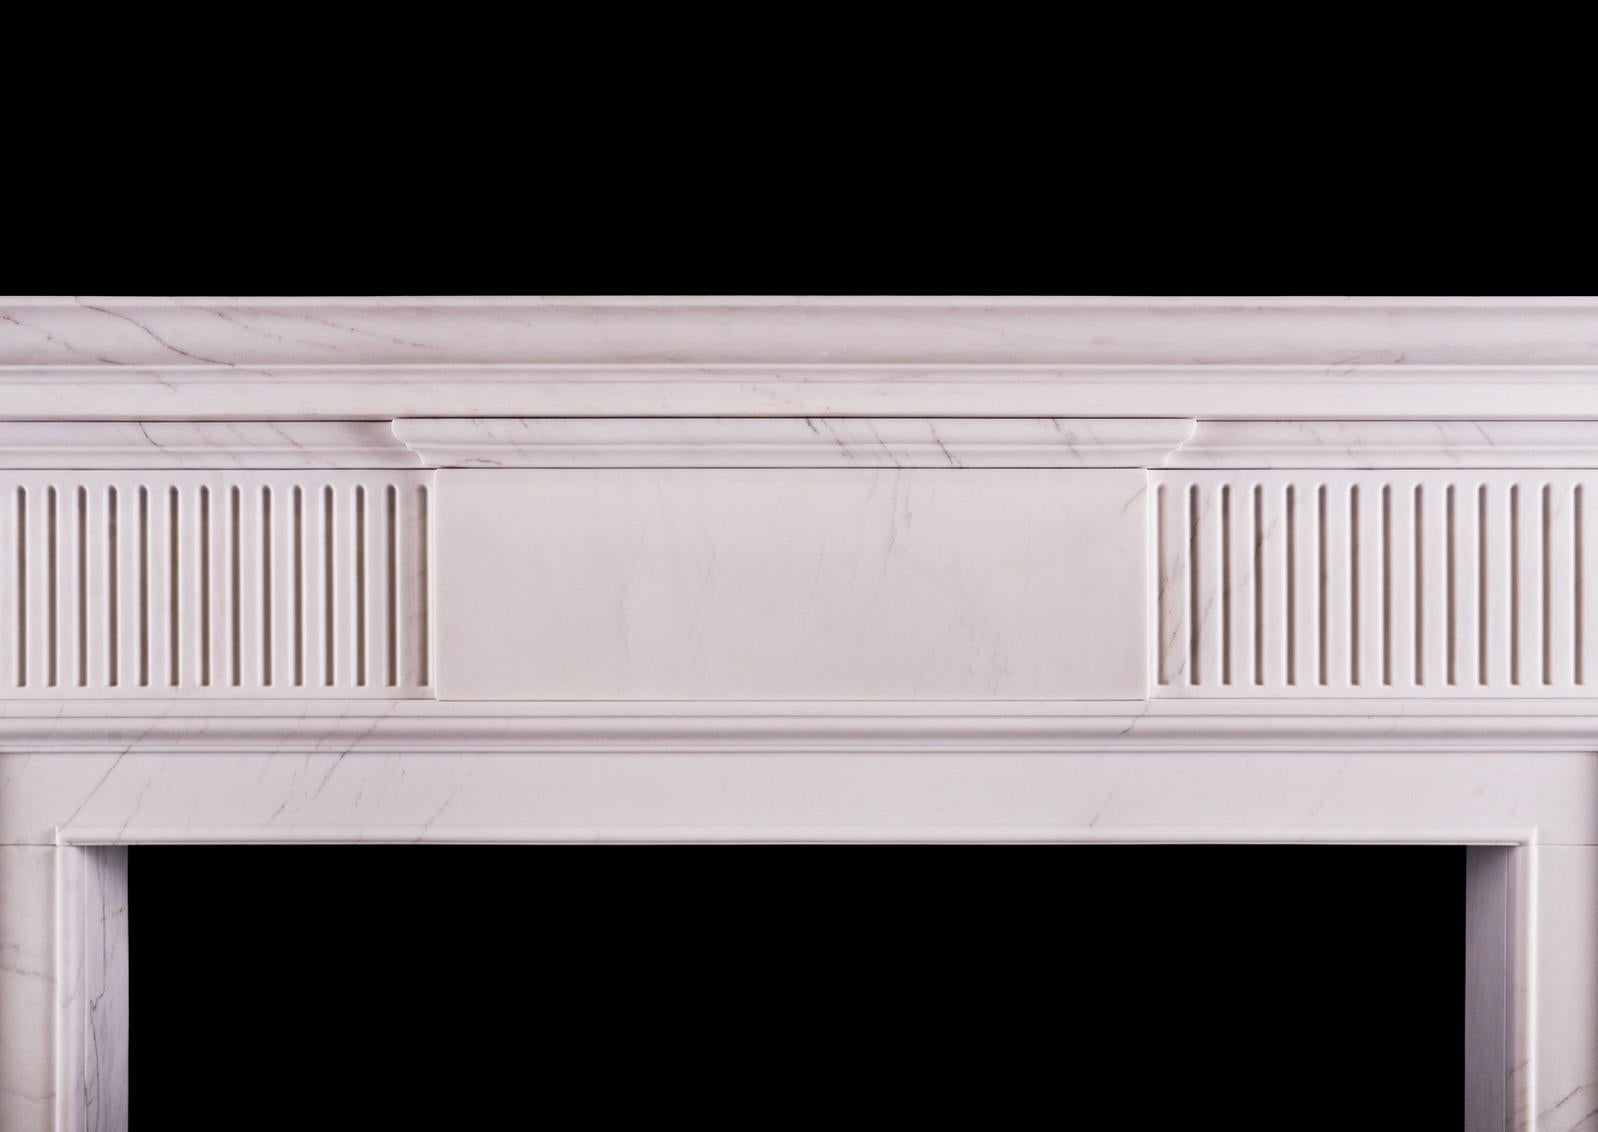 A simple neoclassical English fireplace in veined white marble. The moulded jambs surmounted by fluted frieze and plain centre blocking. Moulded shelf above.

Measurements: 
Shelf width: 1510 mm / 59 1/2 in
Overall height: 1290 mm / 50 3/4